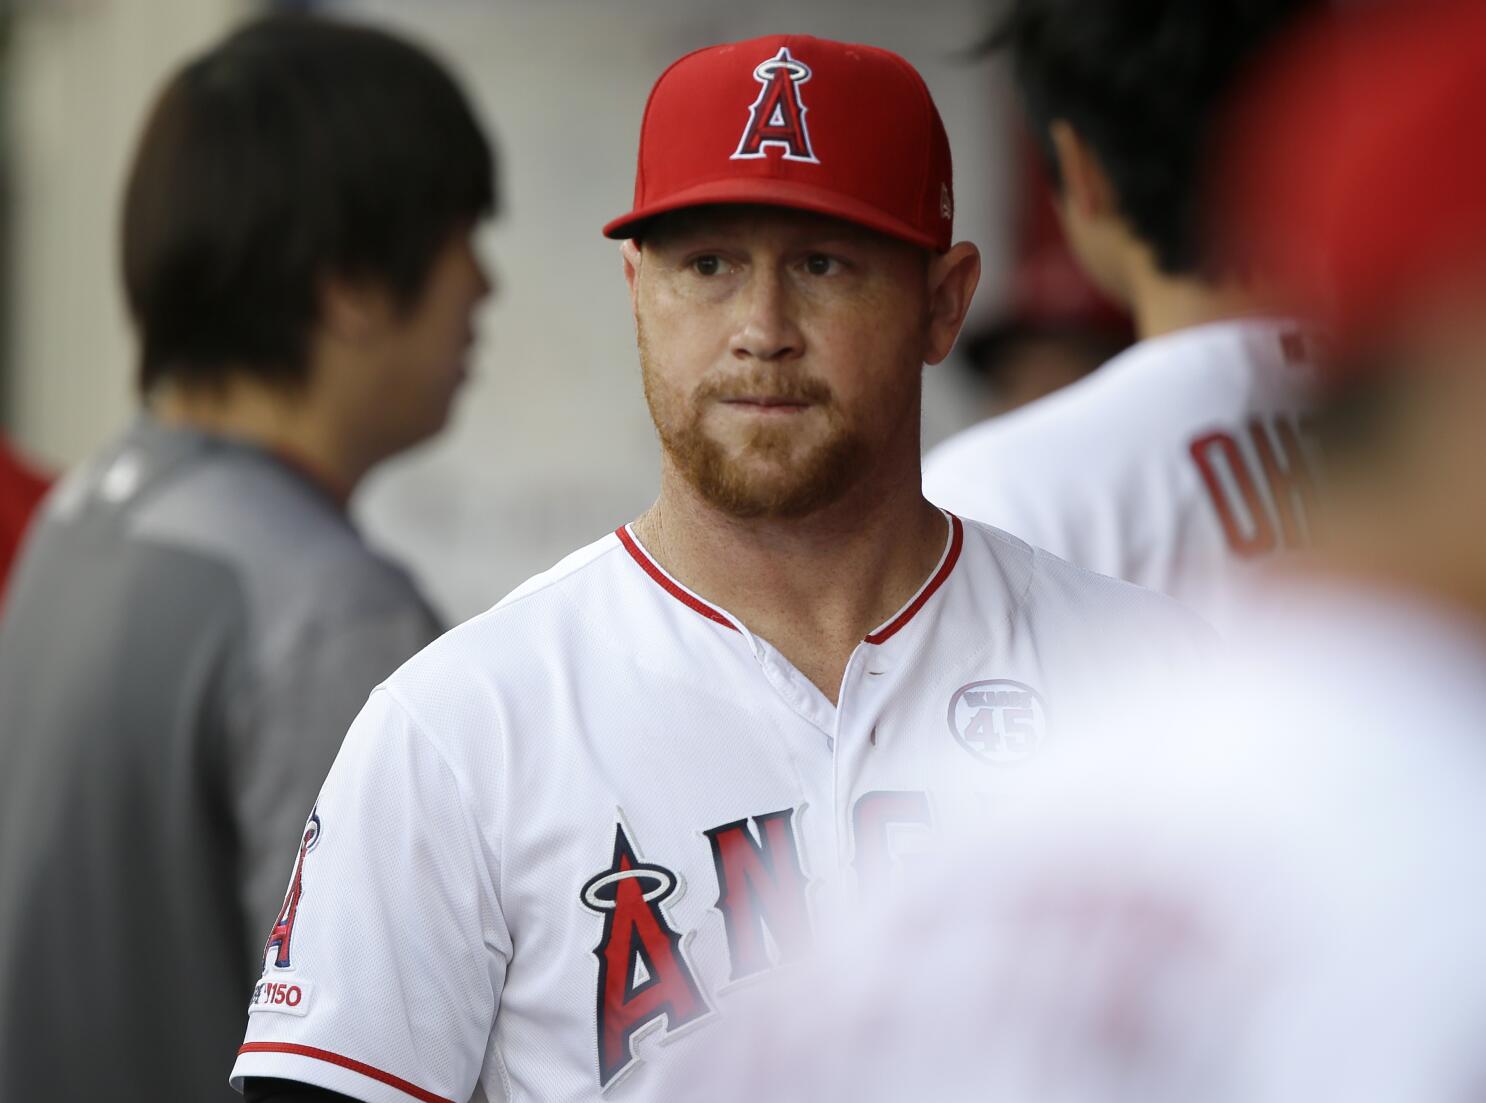 Kole Calhoun knows Angels prospect Jo Adell could be coming for